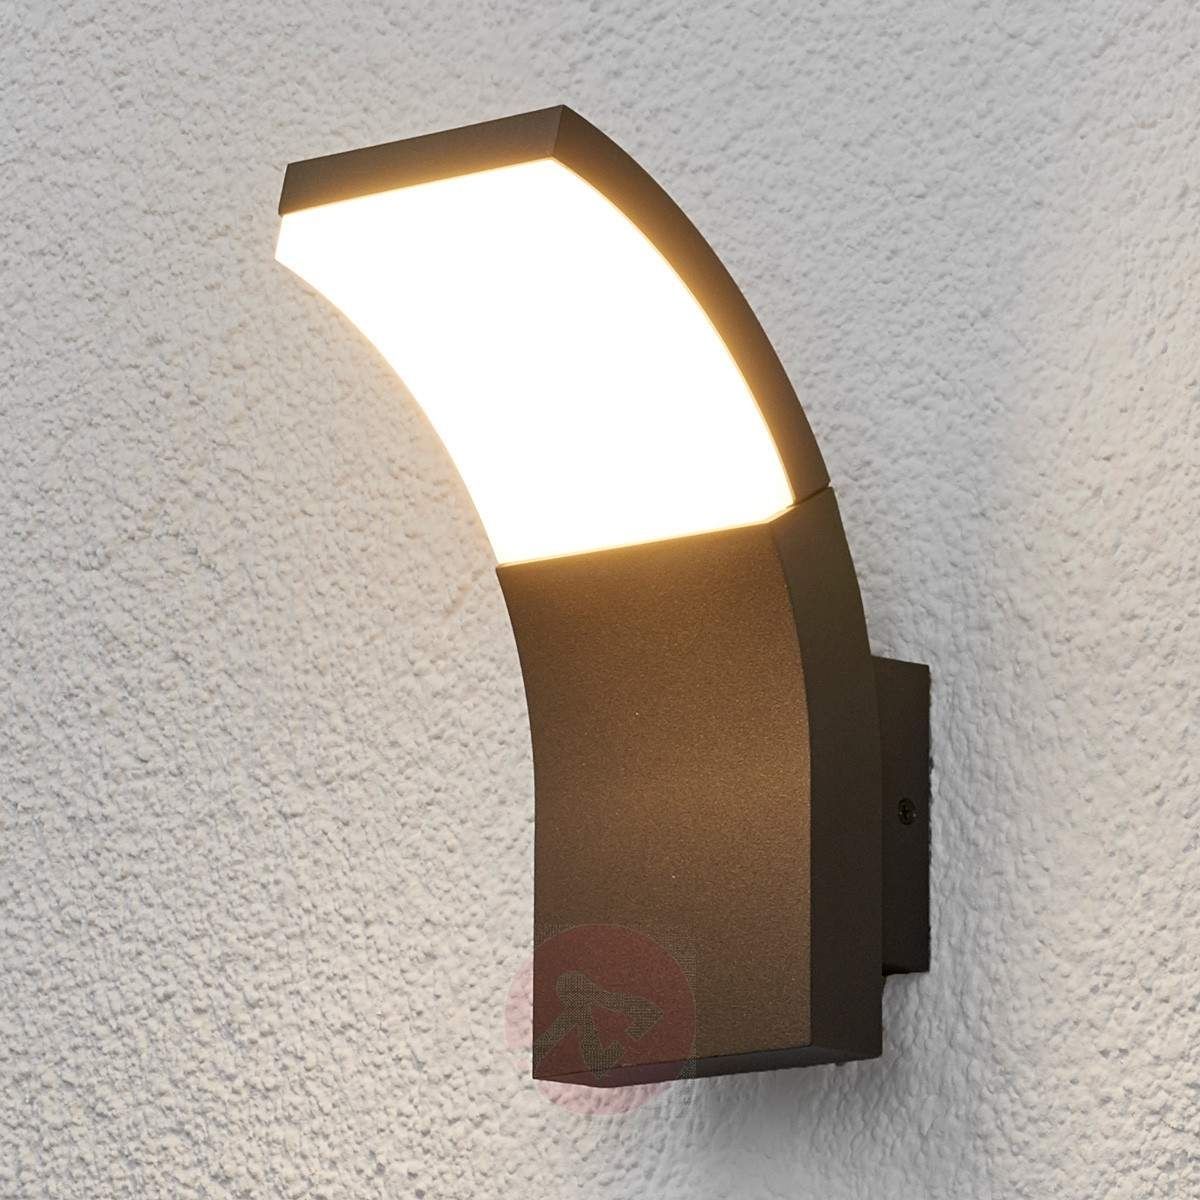 Led Outdoor Wall Light Timm Lights Co Uk Brilliant Led In 4 Within Outdoor Wall Lights At John Lewis (Photo 8 of 15)